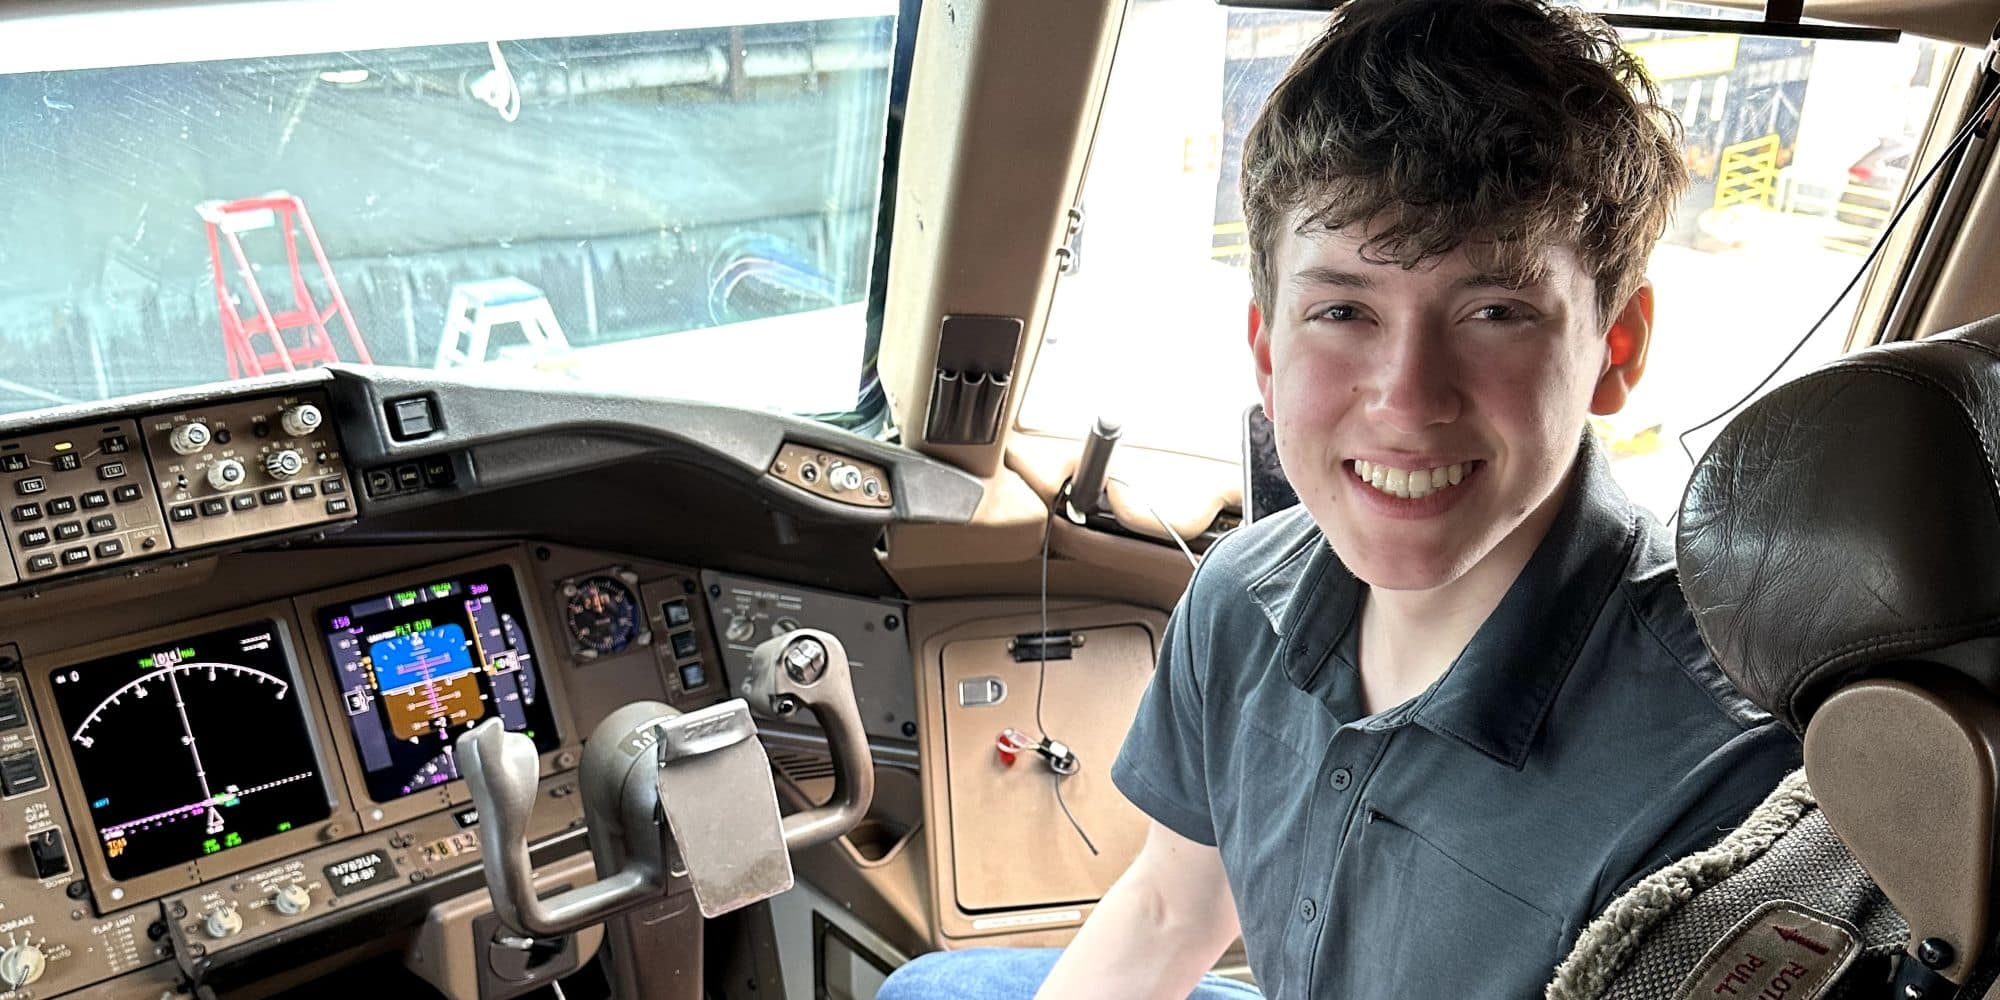 Christian Tabor is earning his A.S. in Aeronautics with the goal of traveling the world as a professional airline pilot.